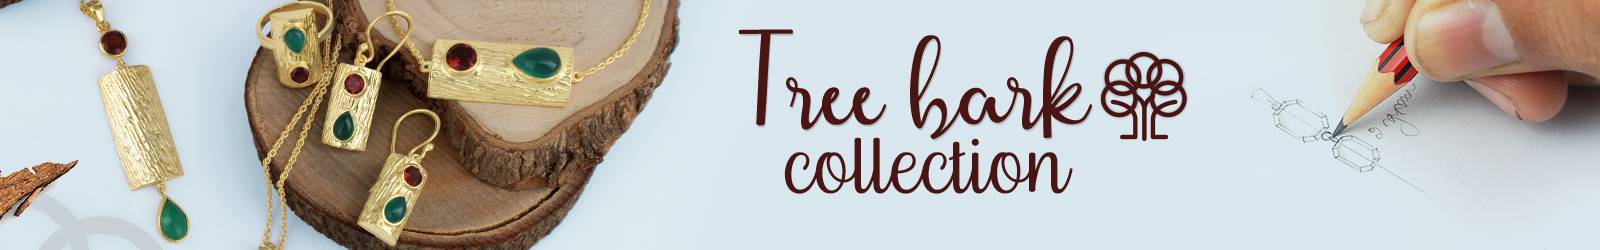 Wholesale Textured Silver Jewelry Tree Bark Collection Store, Shop in Jaipur